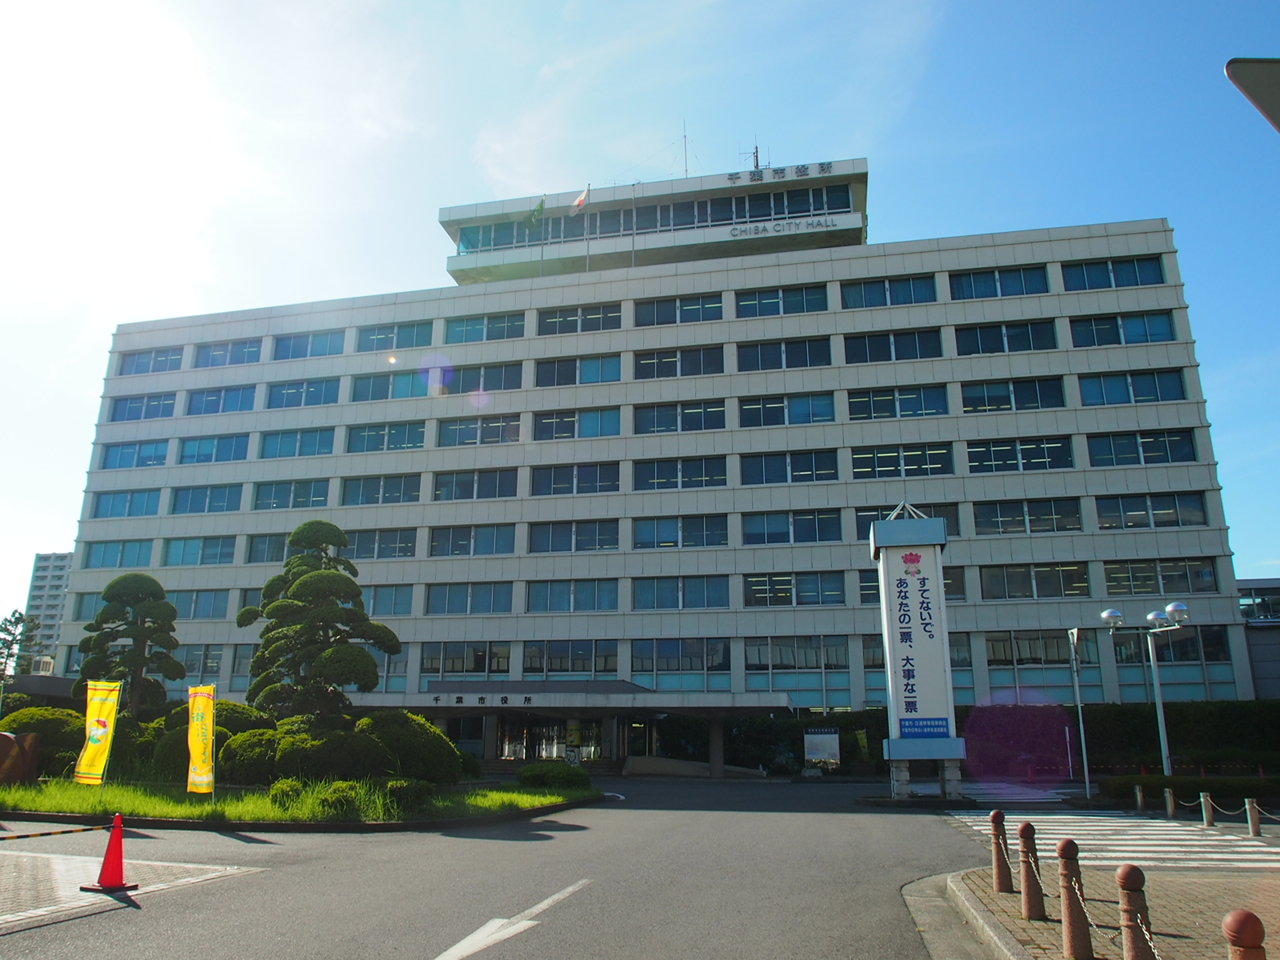 Government office. 440m to Chiba City Hall (government office)